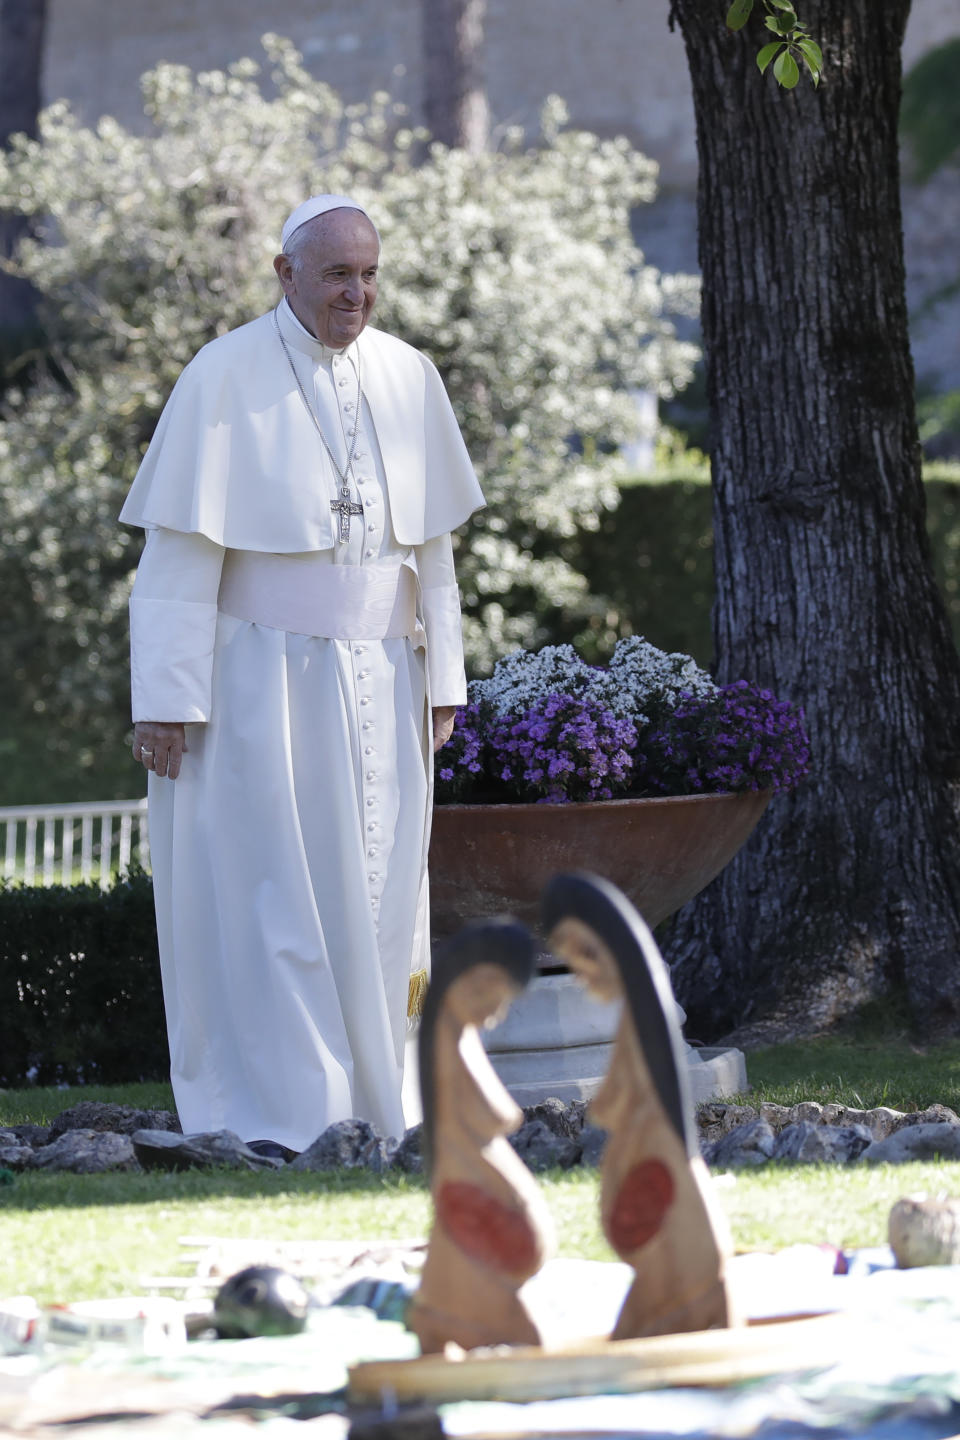 In this photo taken on Friday, Oct. 4, 2019, Pope Francis walks past wooden statues portraying naked pregnant women as he arrives to attend a tree planting rite with members of Amazon indigenous populations, in the Vatican gardens. Pope Francis’ meeting on the Amazon is wrapping up after three weeks of debate over married priests, the environment _ and the destruction of indigenous statues that underscored the willingness of conservatives to violently vent their opposition to the pope. (AP Photo/Alessandra Tarantino)